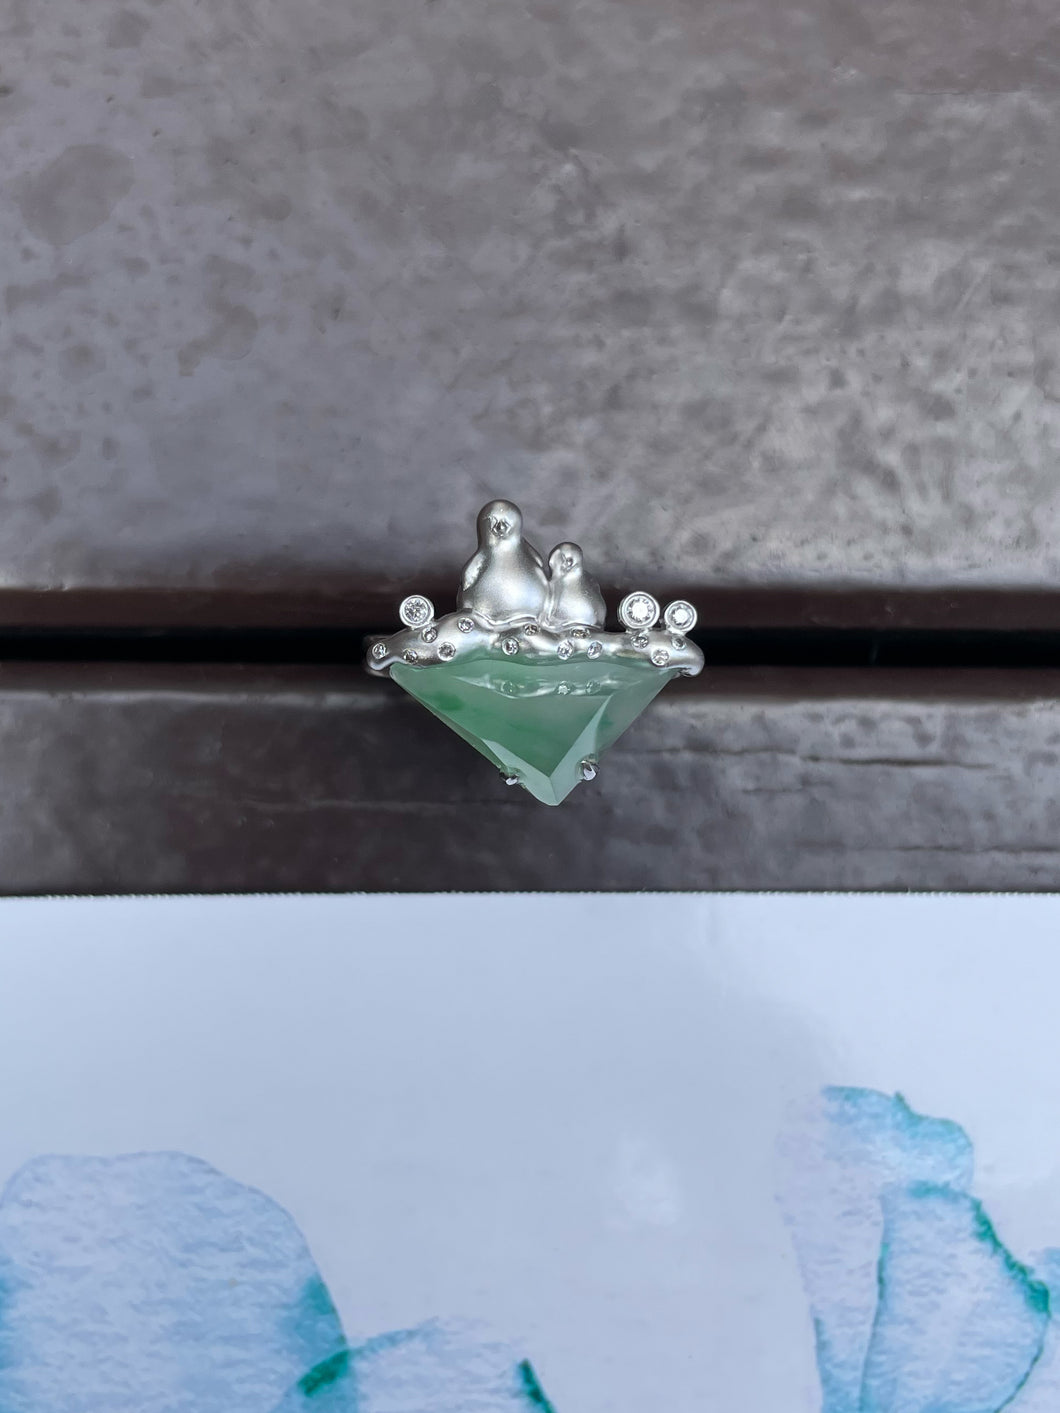 Icy Green Jade Ring - Iceberg with Penguins (NJR140)